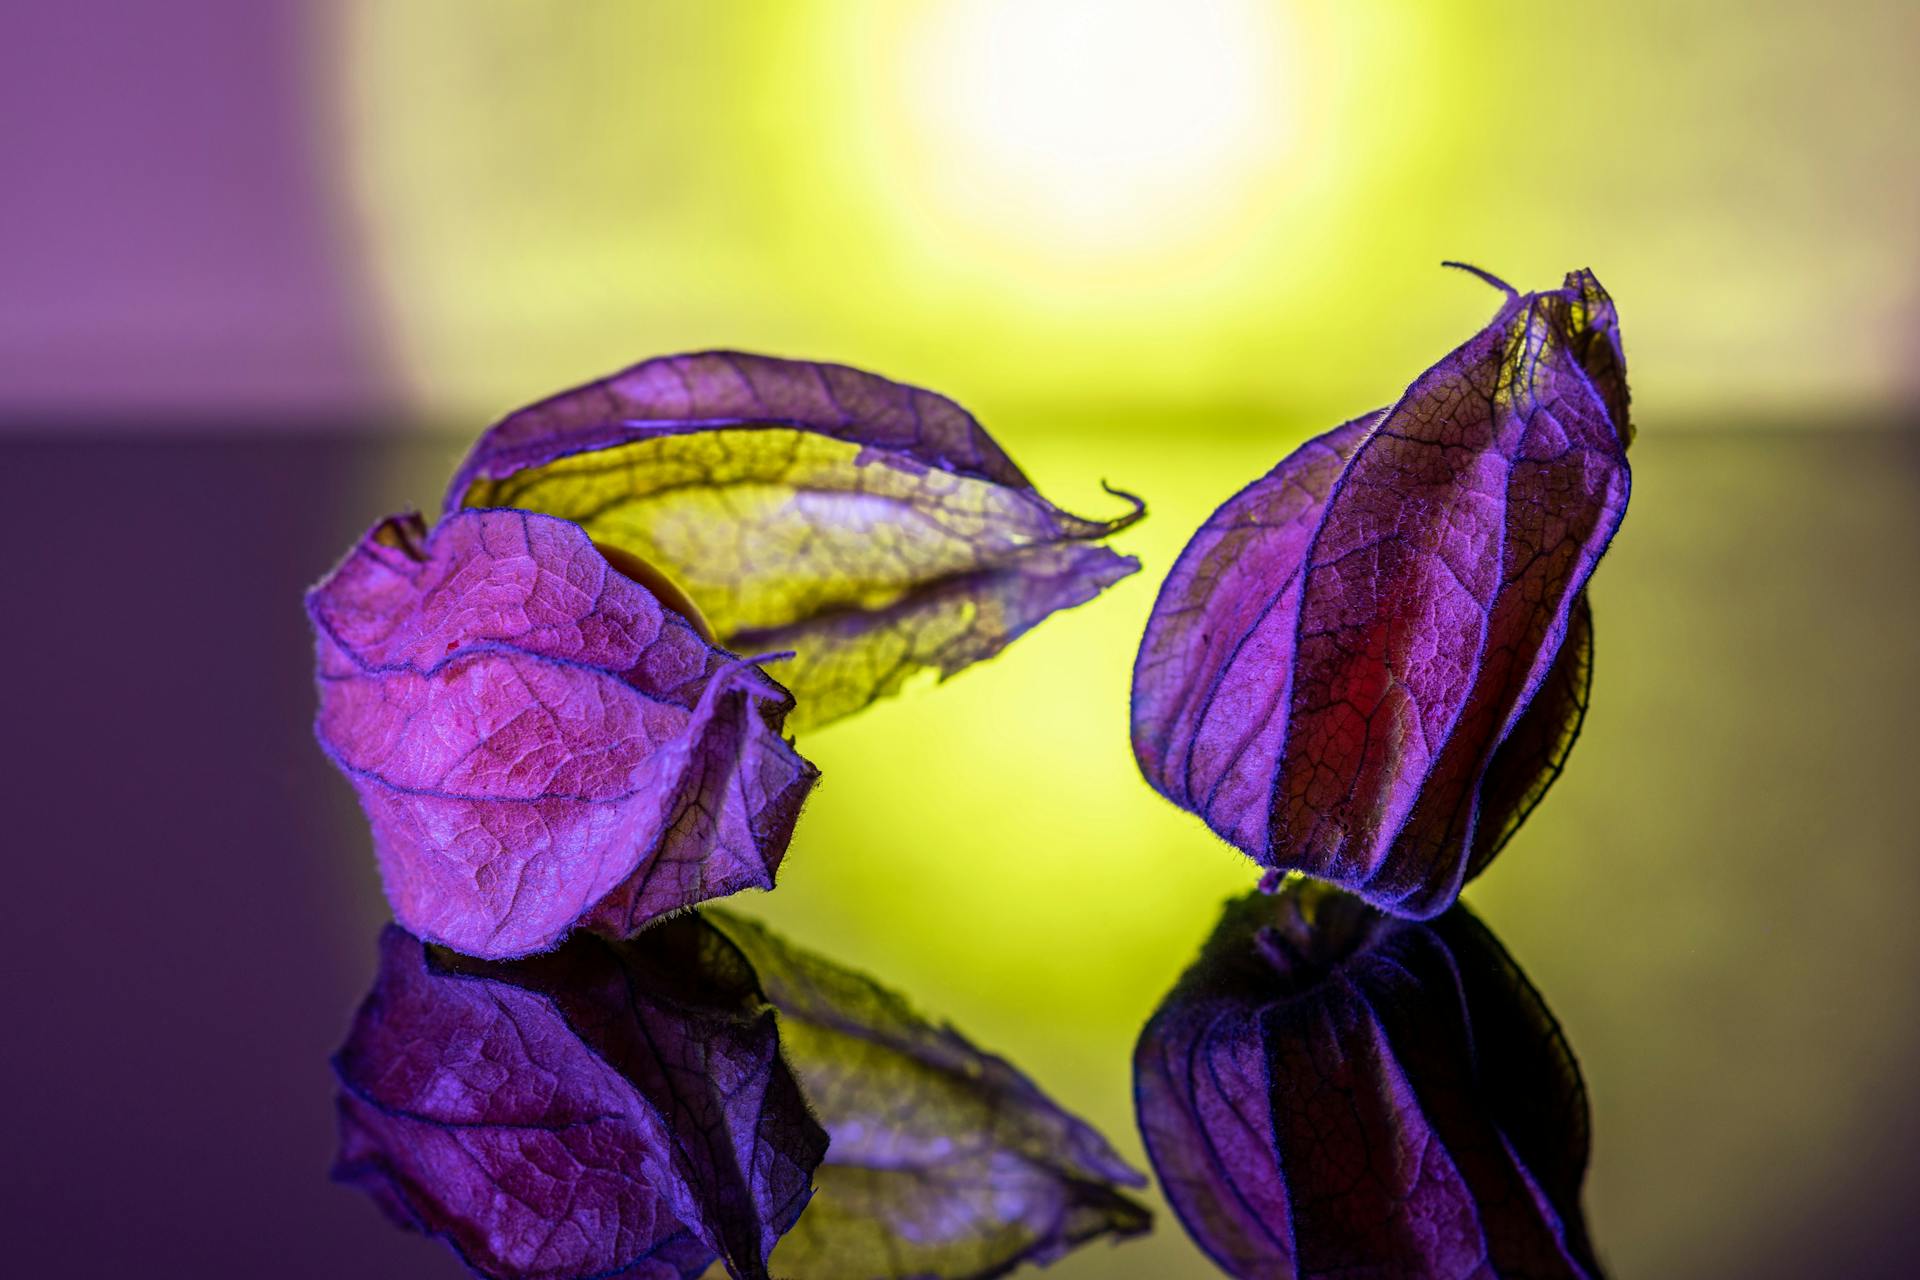 Unpeeled physalis fruits on table under yellow violet light